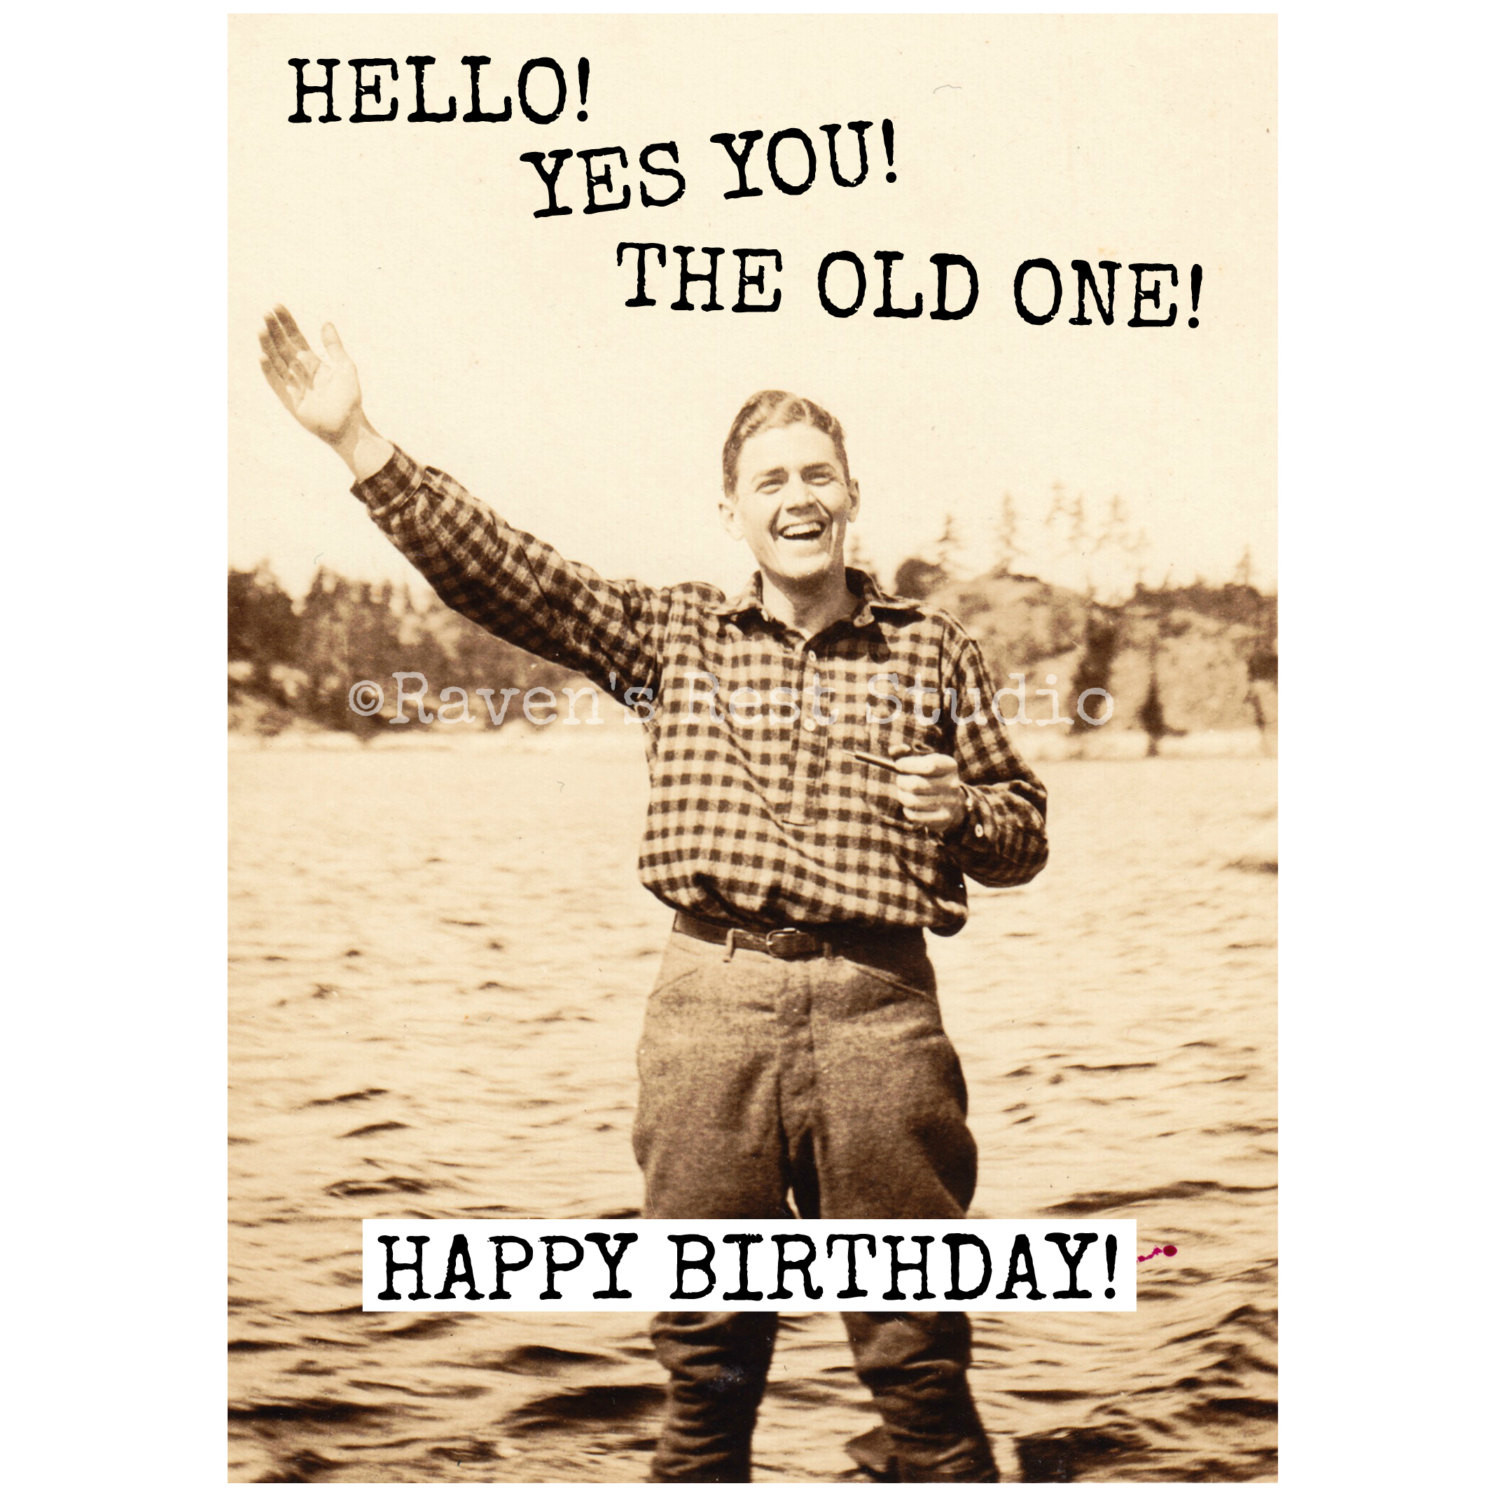 Funny Birthday Wishes For A Man
 Card 317 HELLO YES you The OLD one Happy Birthday